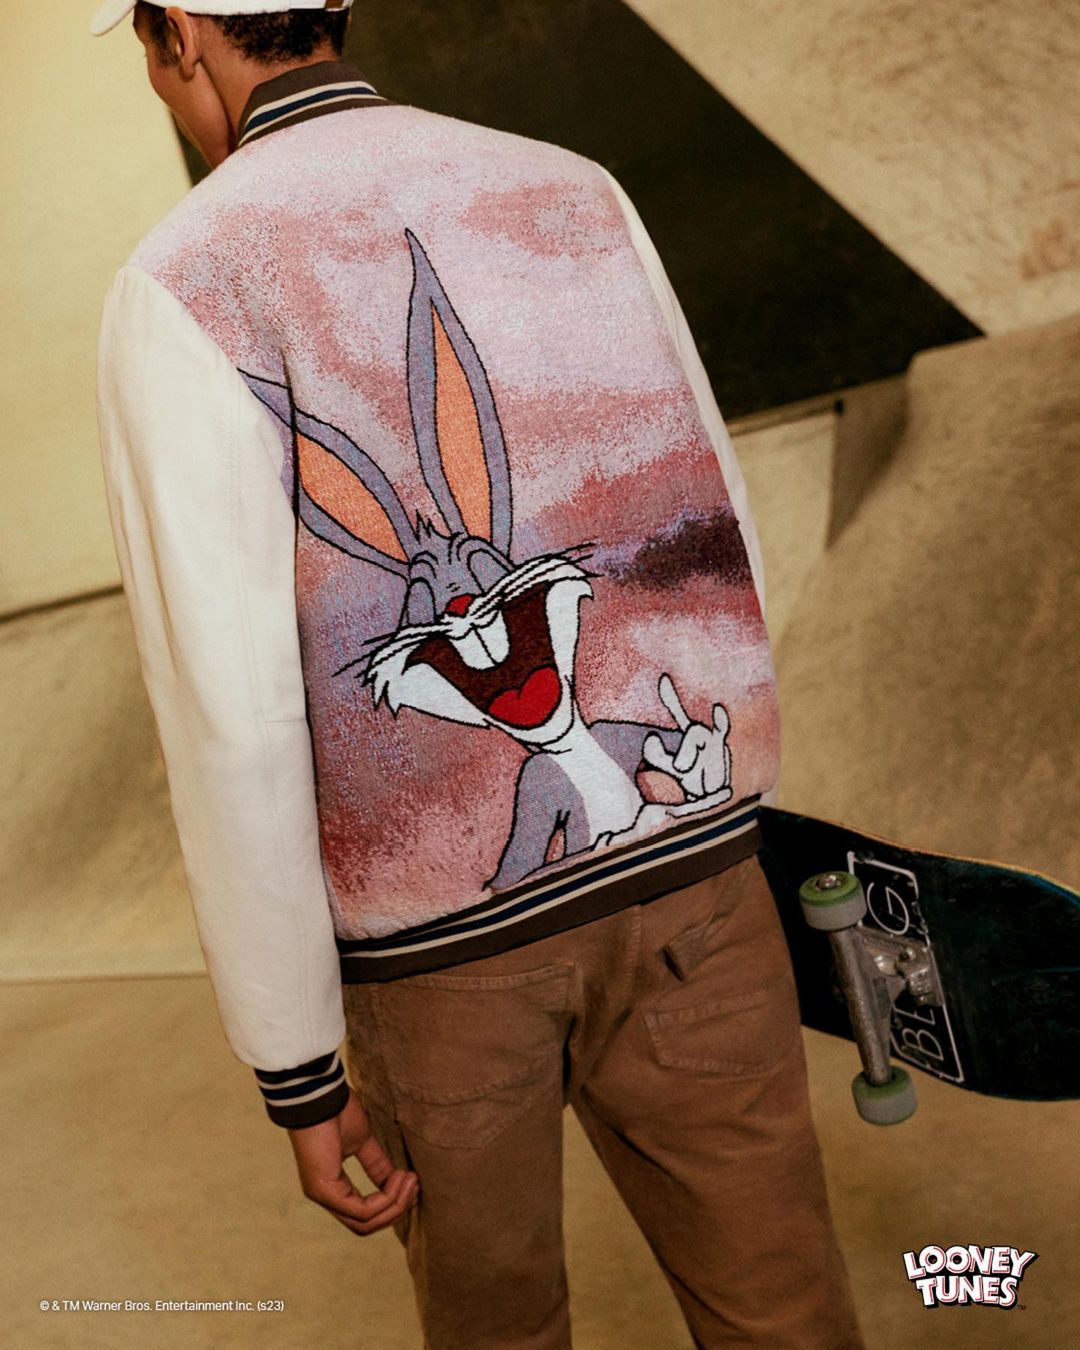 Scotch & Soda Releases Limited Edition Collaboration With Looney Tunes